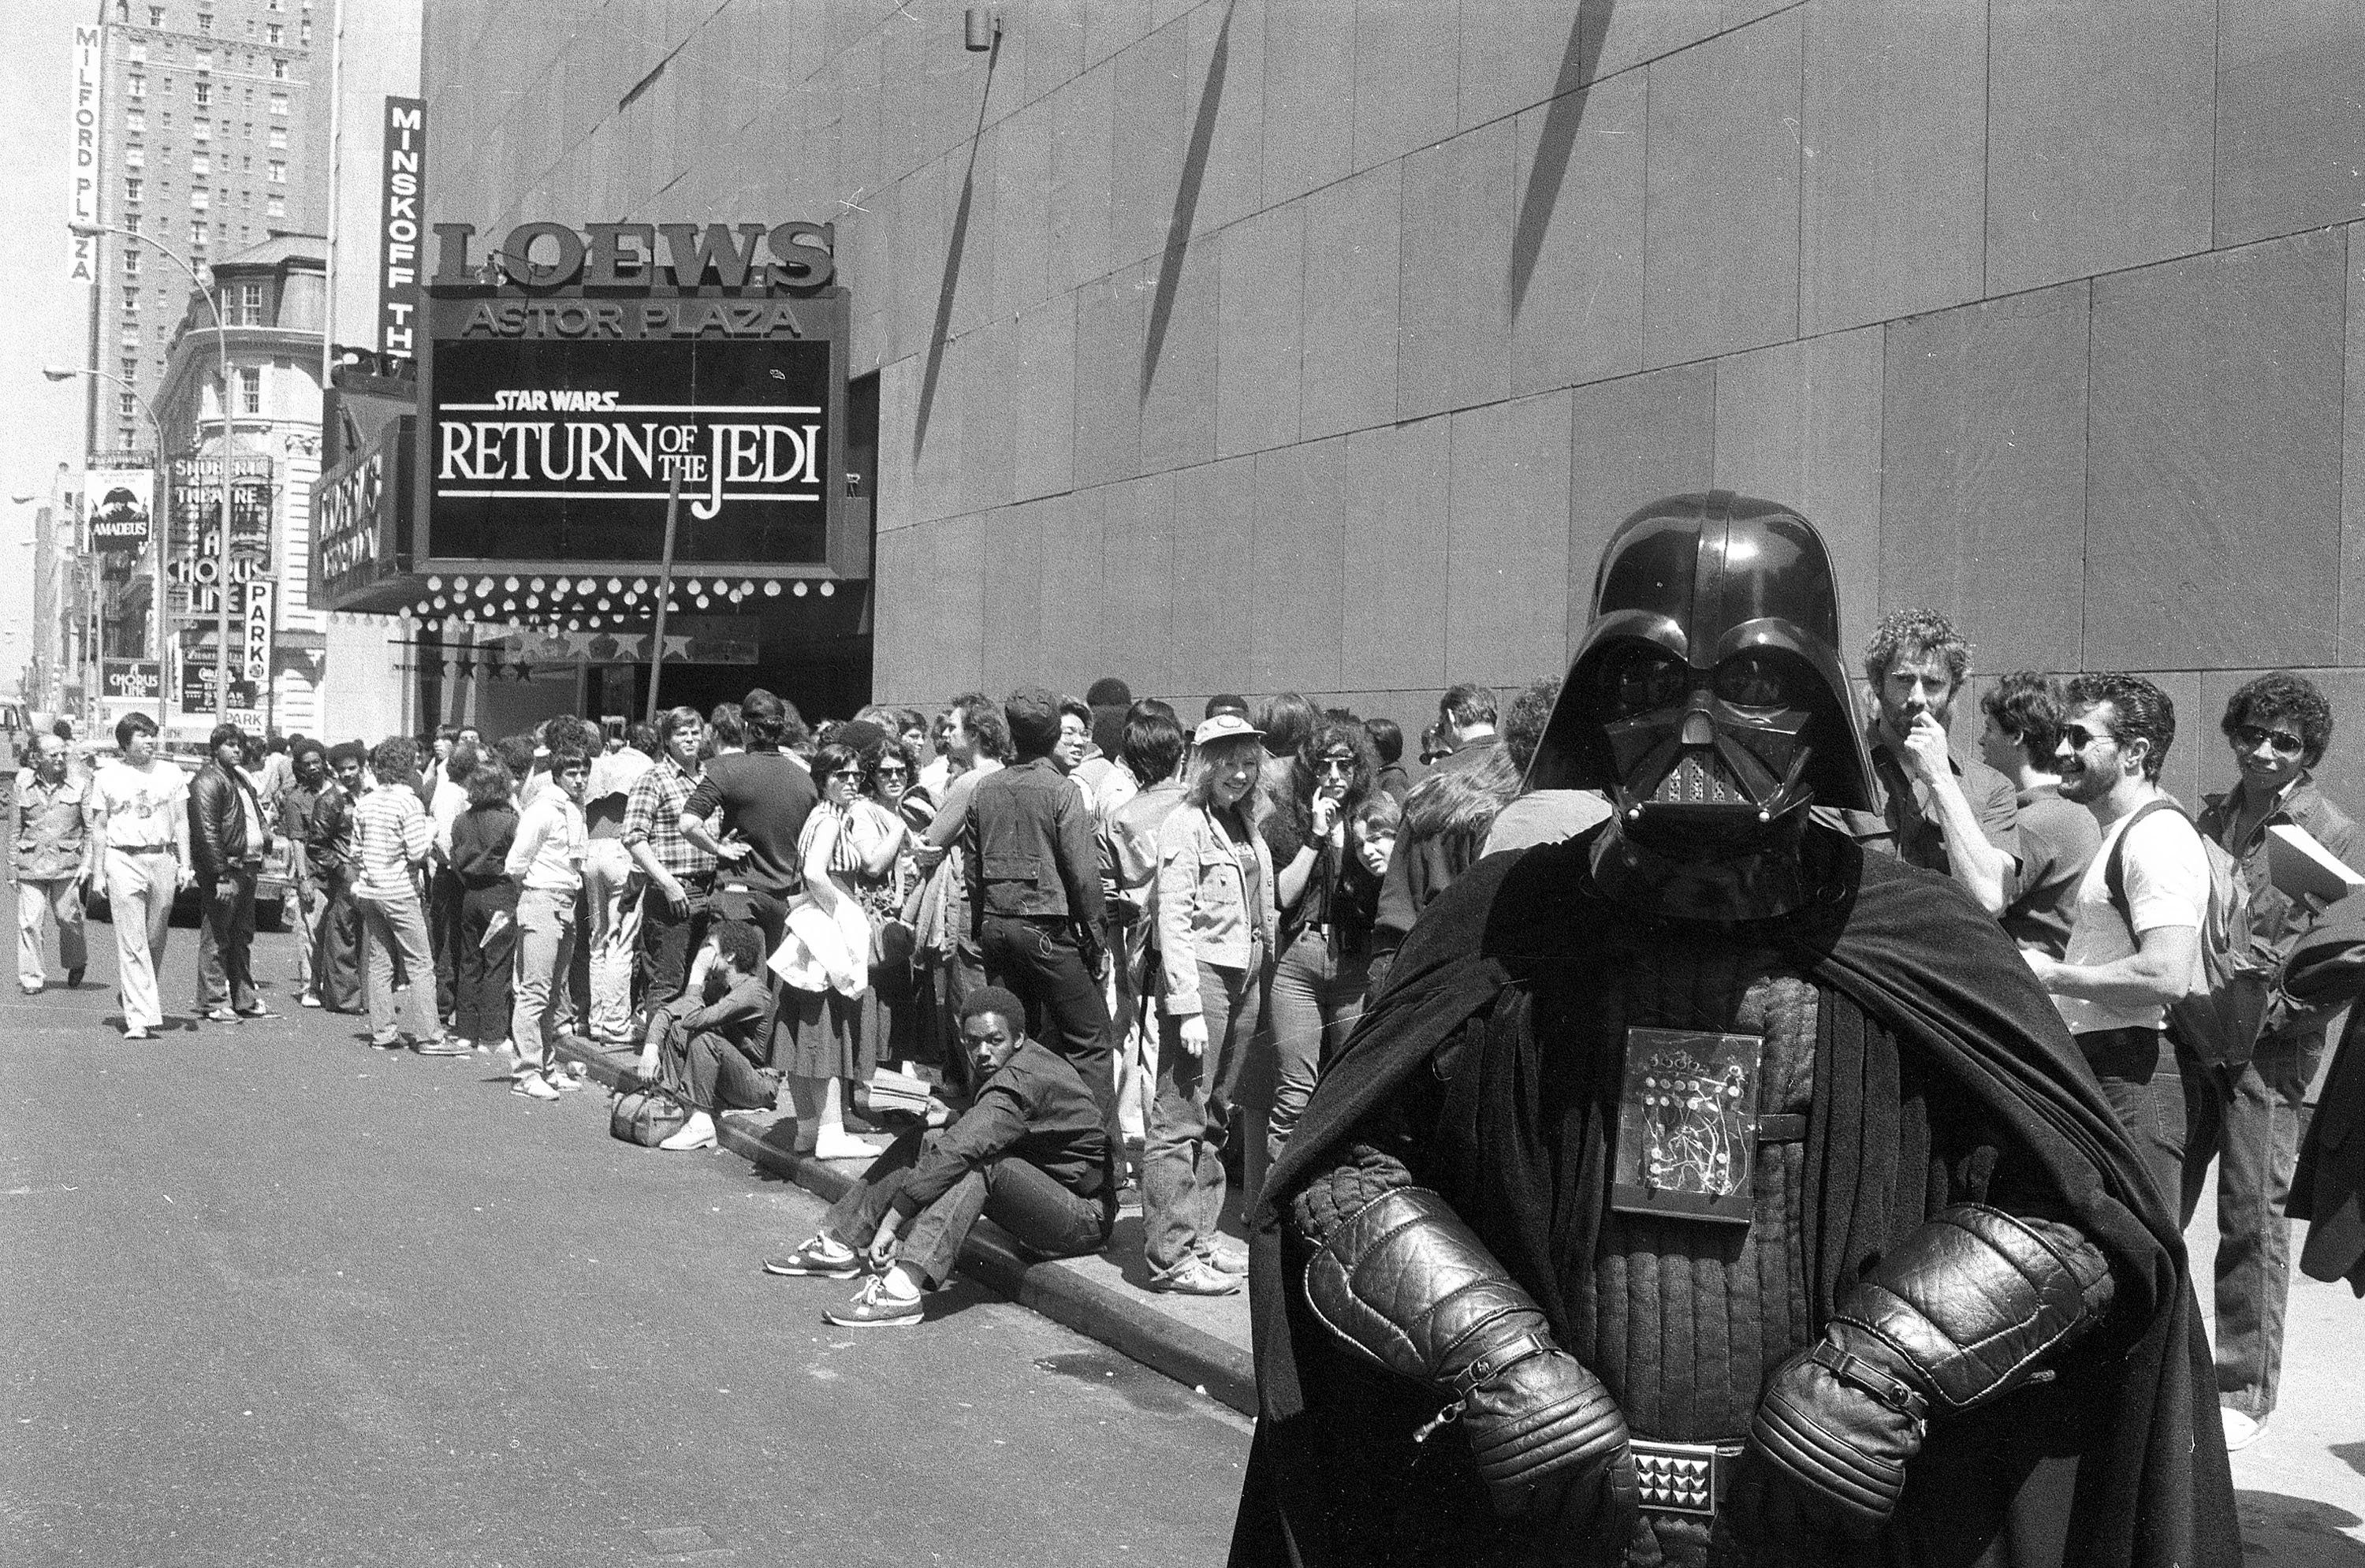 "Star Wars" fan Danny Fitzgerald of Staten Island, in Darth Vader costume, poses in front of Loews Astor Plaza movie theater in Times Square in New York, May 25, 1983, where fans are lined up for the premiere of "The Return of the Jedi," the third in a series of the "Star Wars" saga. (AP Photo/Dave Pickoff)